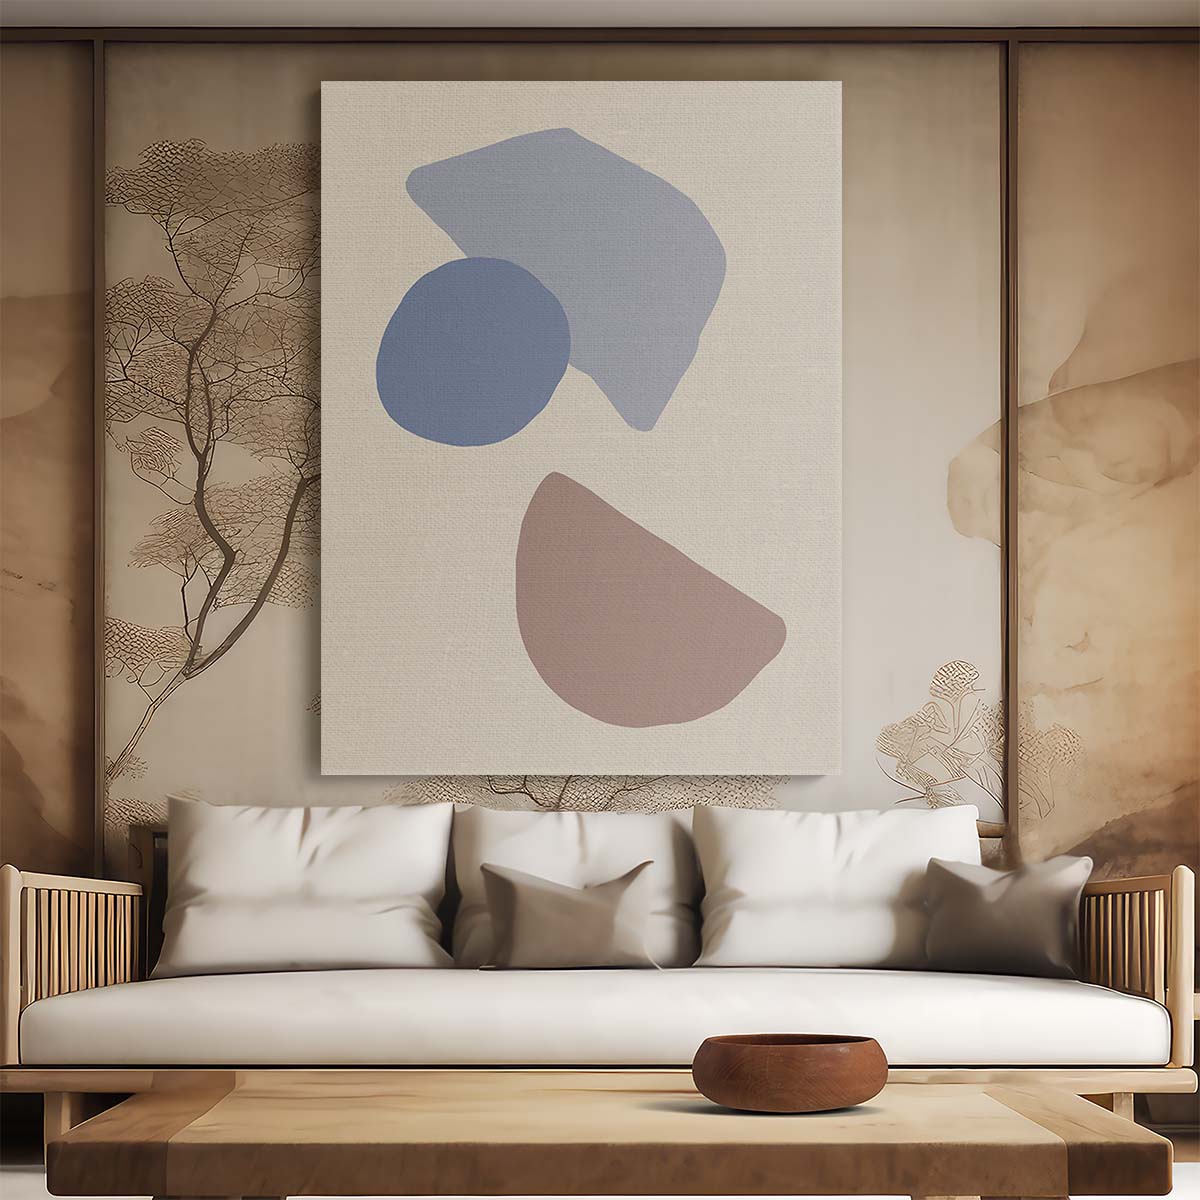 Minimalist Beige Geometric Illustration, Abstract Organic Shapes Wall Art by Luxuriance Designs, made in USA